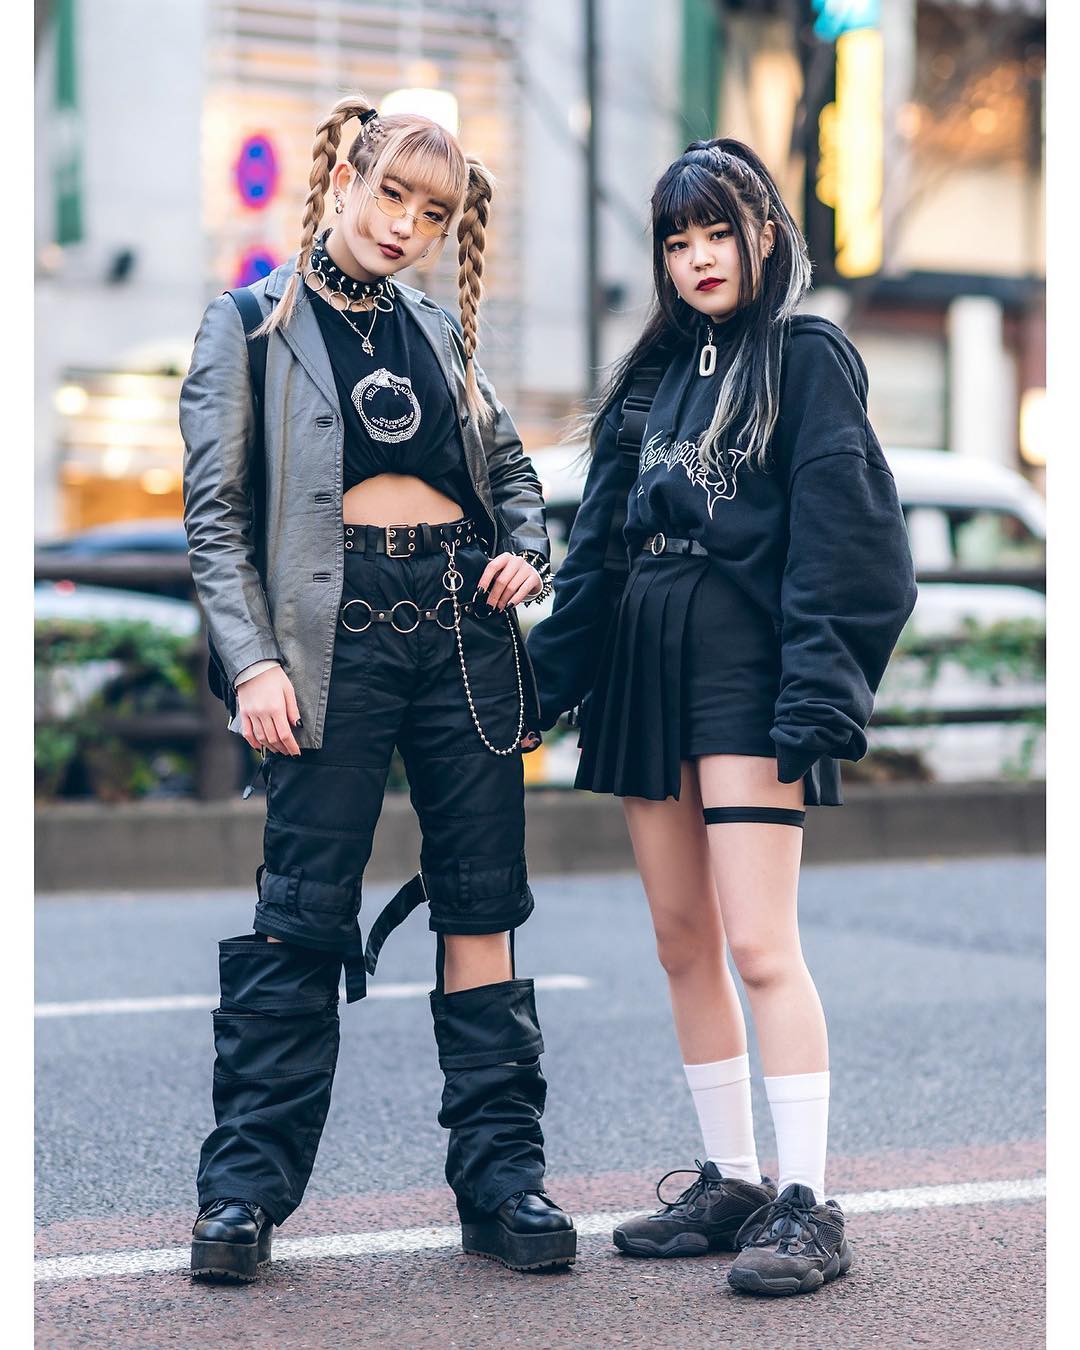 @Tokyo Fashion: Japanese 16-year-olds Maria (@0_rei__maria) and Megumi ...